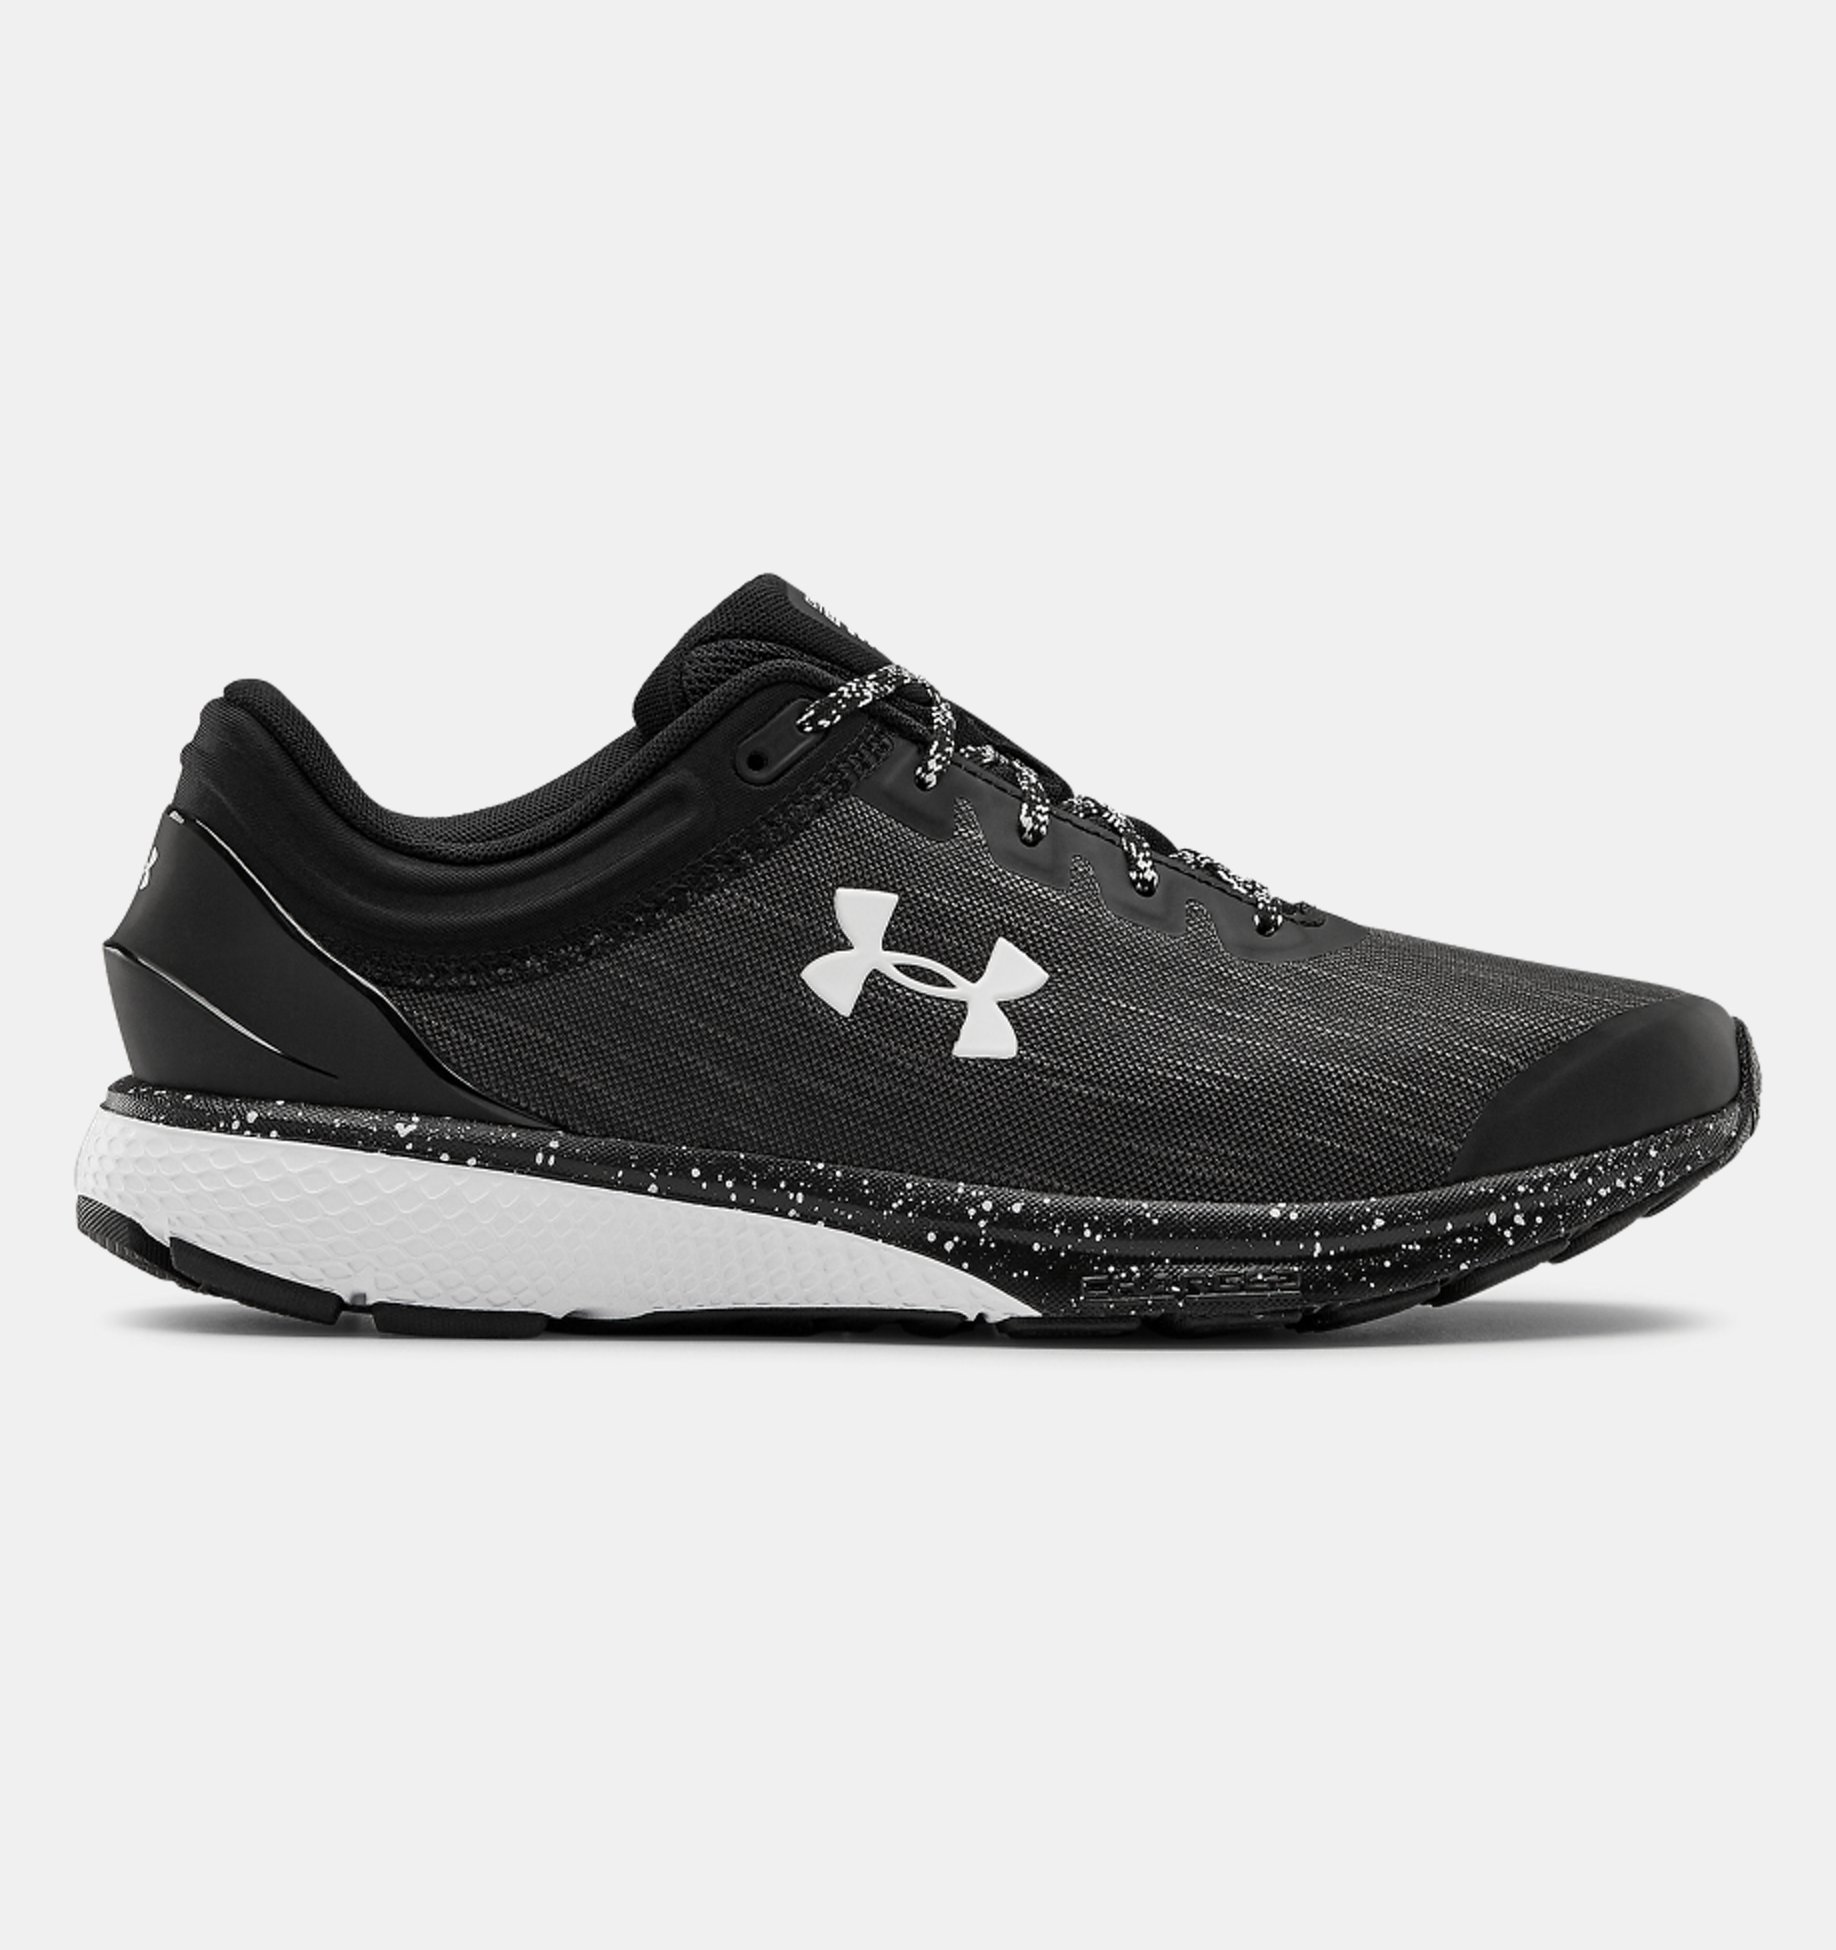 Underarmour Mens UA Charged Escape 3 Evo Running Shoes